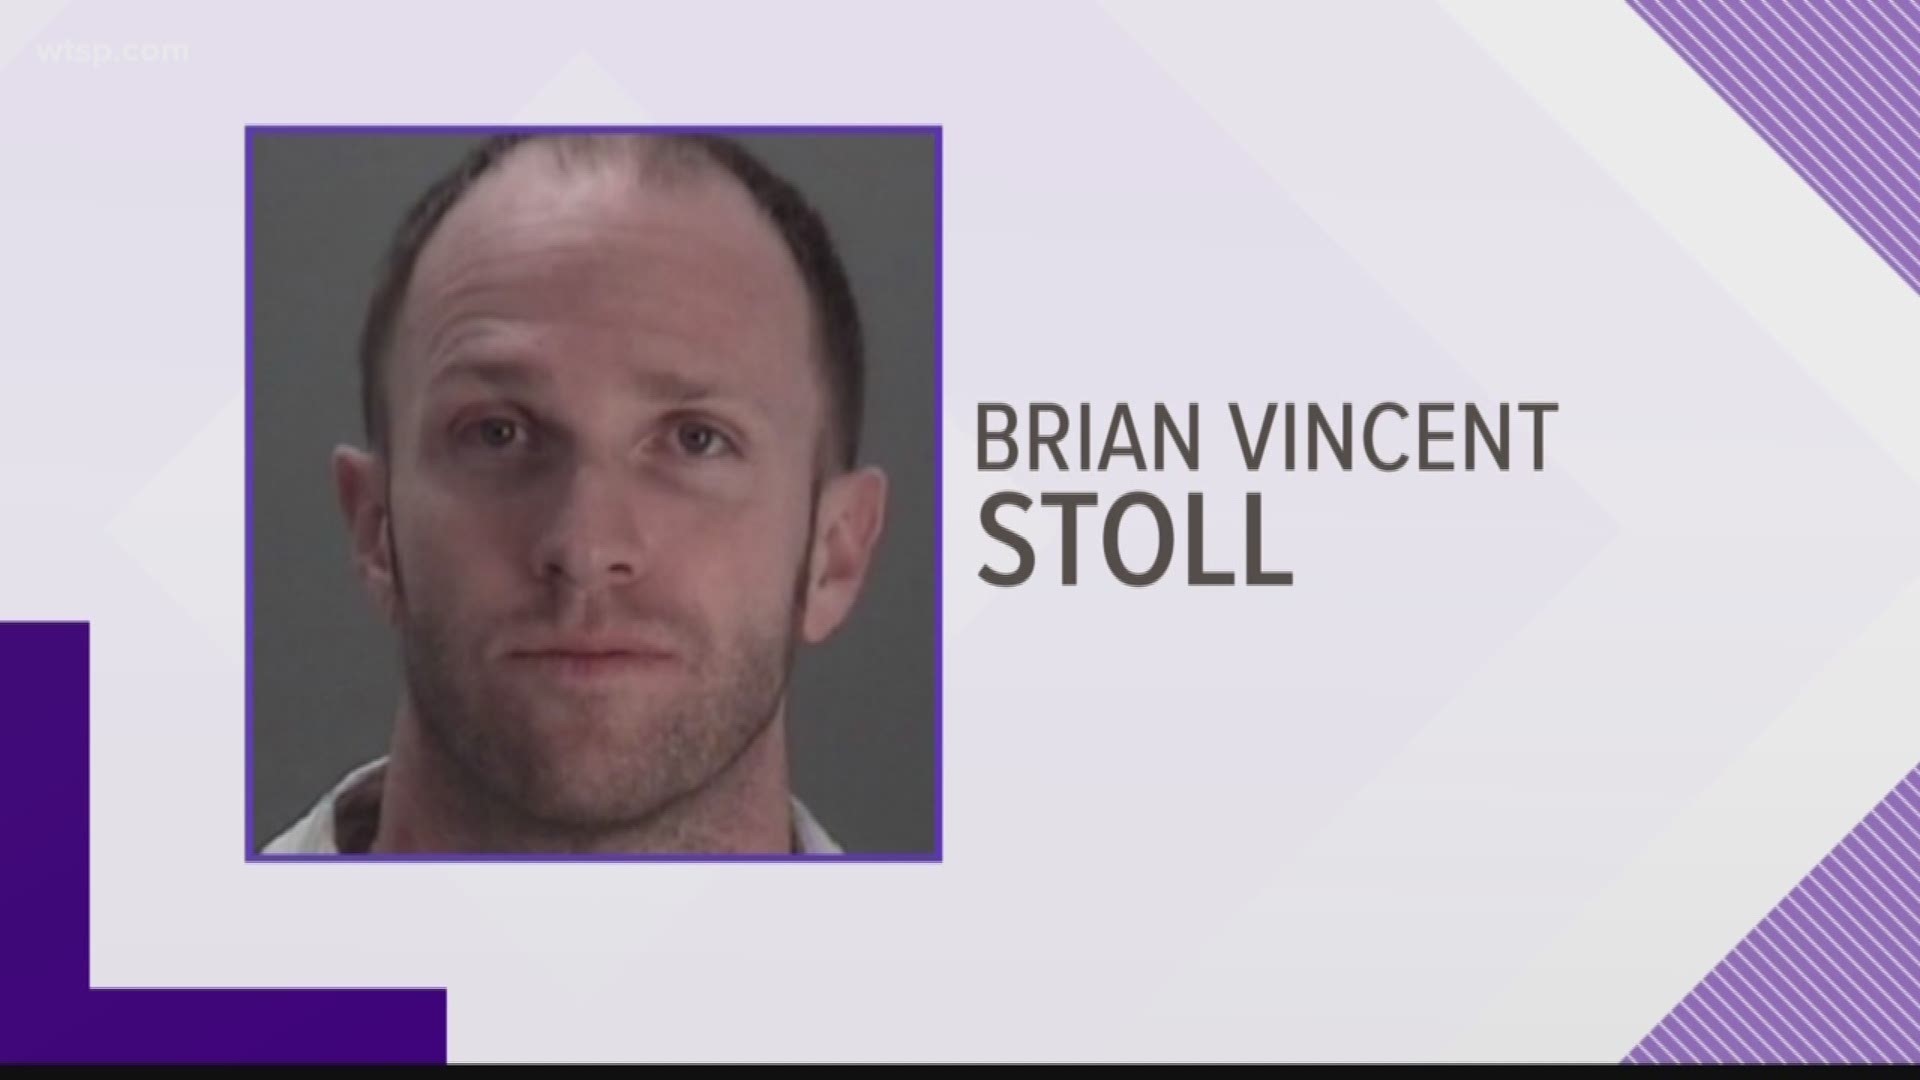 Brian Vincent Stoll is accused of killing a 79-year-old woman when he was 19 years old. https://bit.ly/2EVjm4p